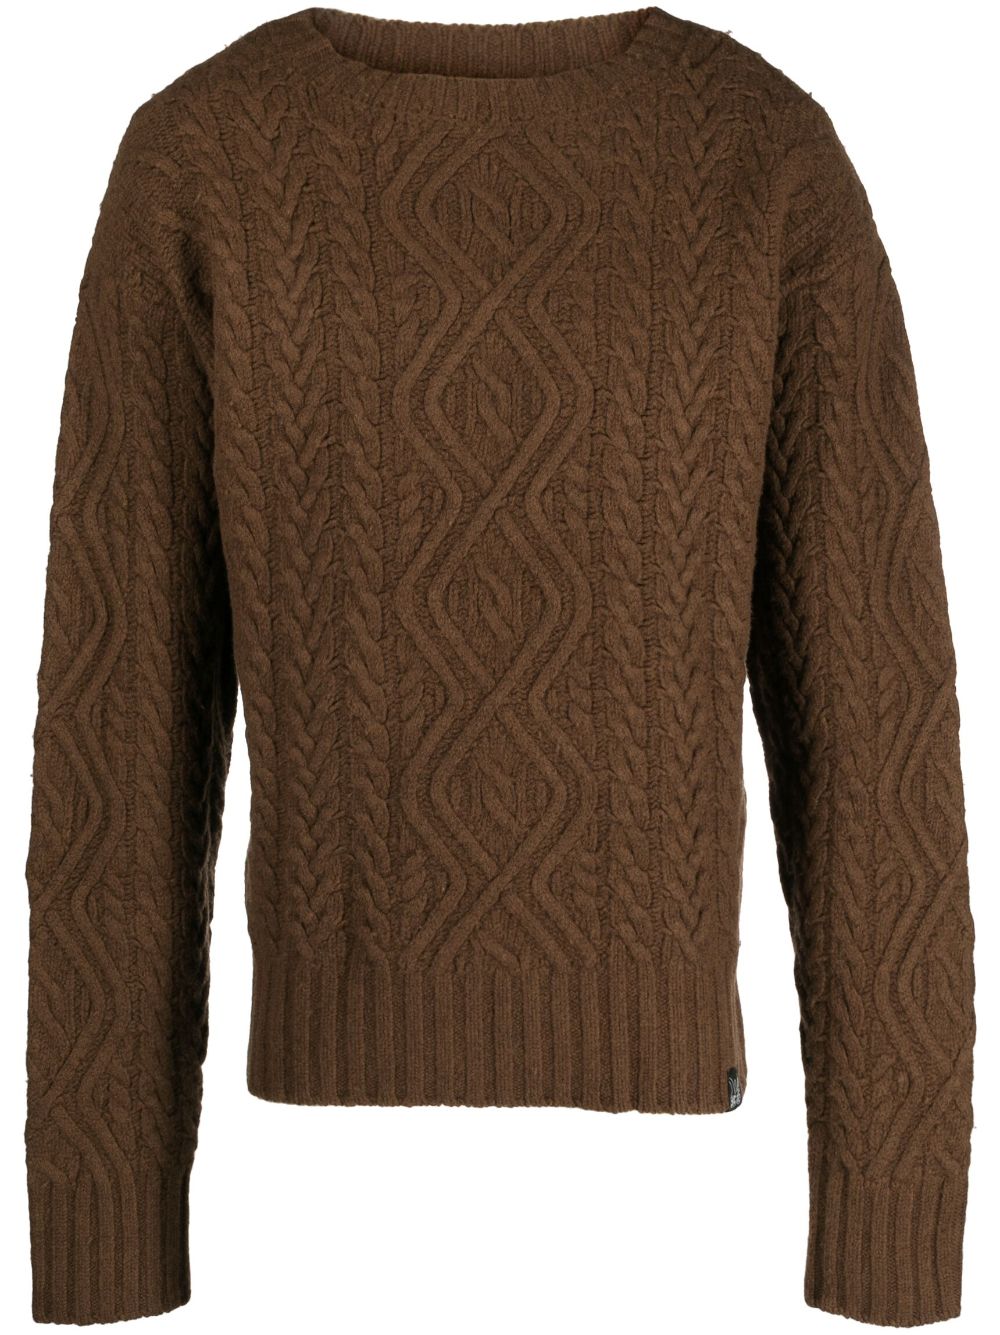 MARTINE ROSE CABLE-KNIT JUMPER